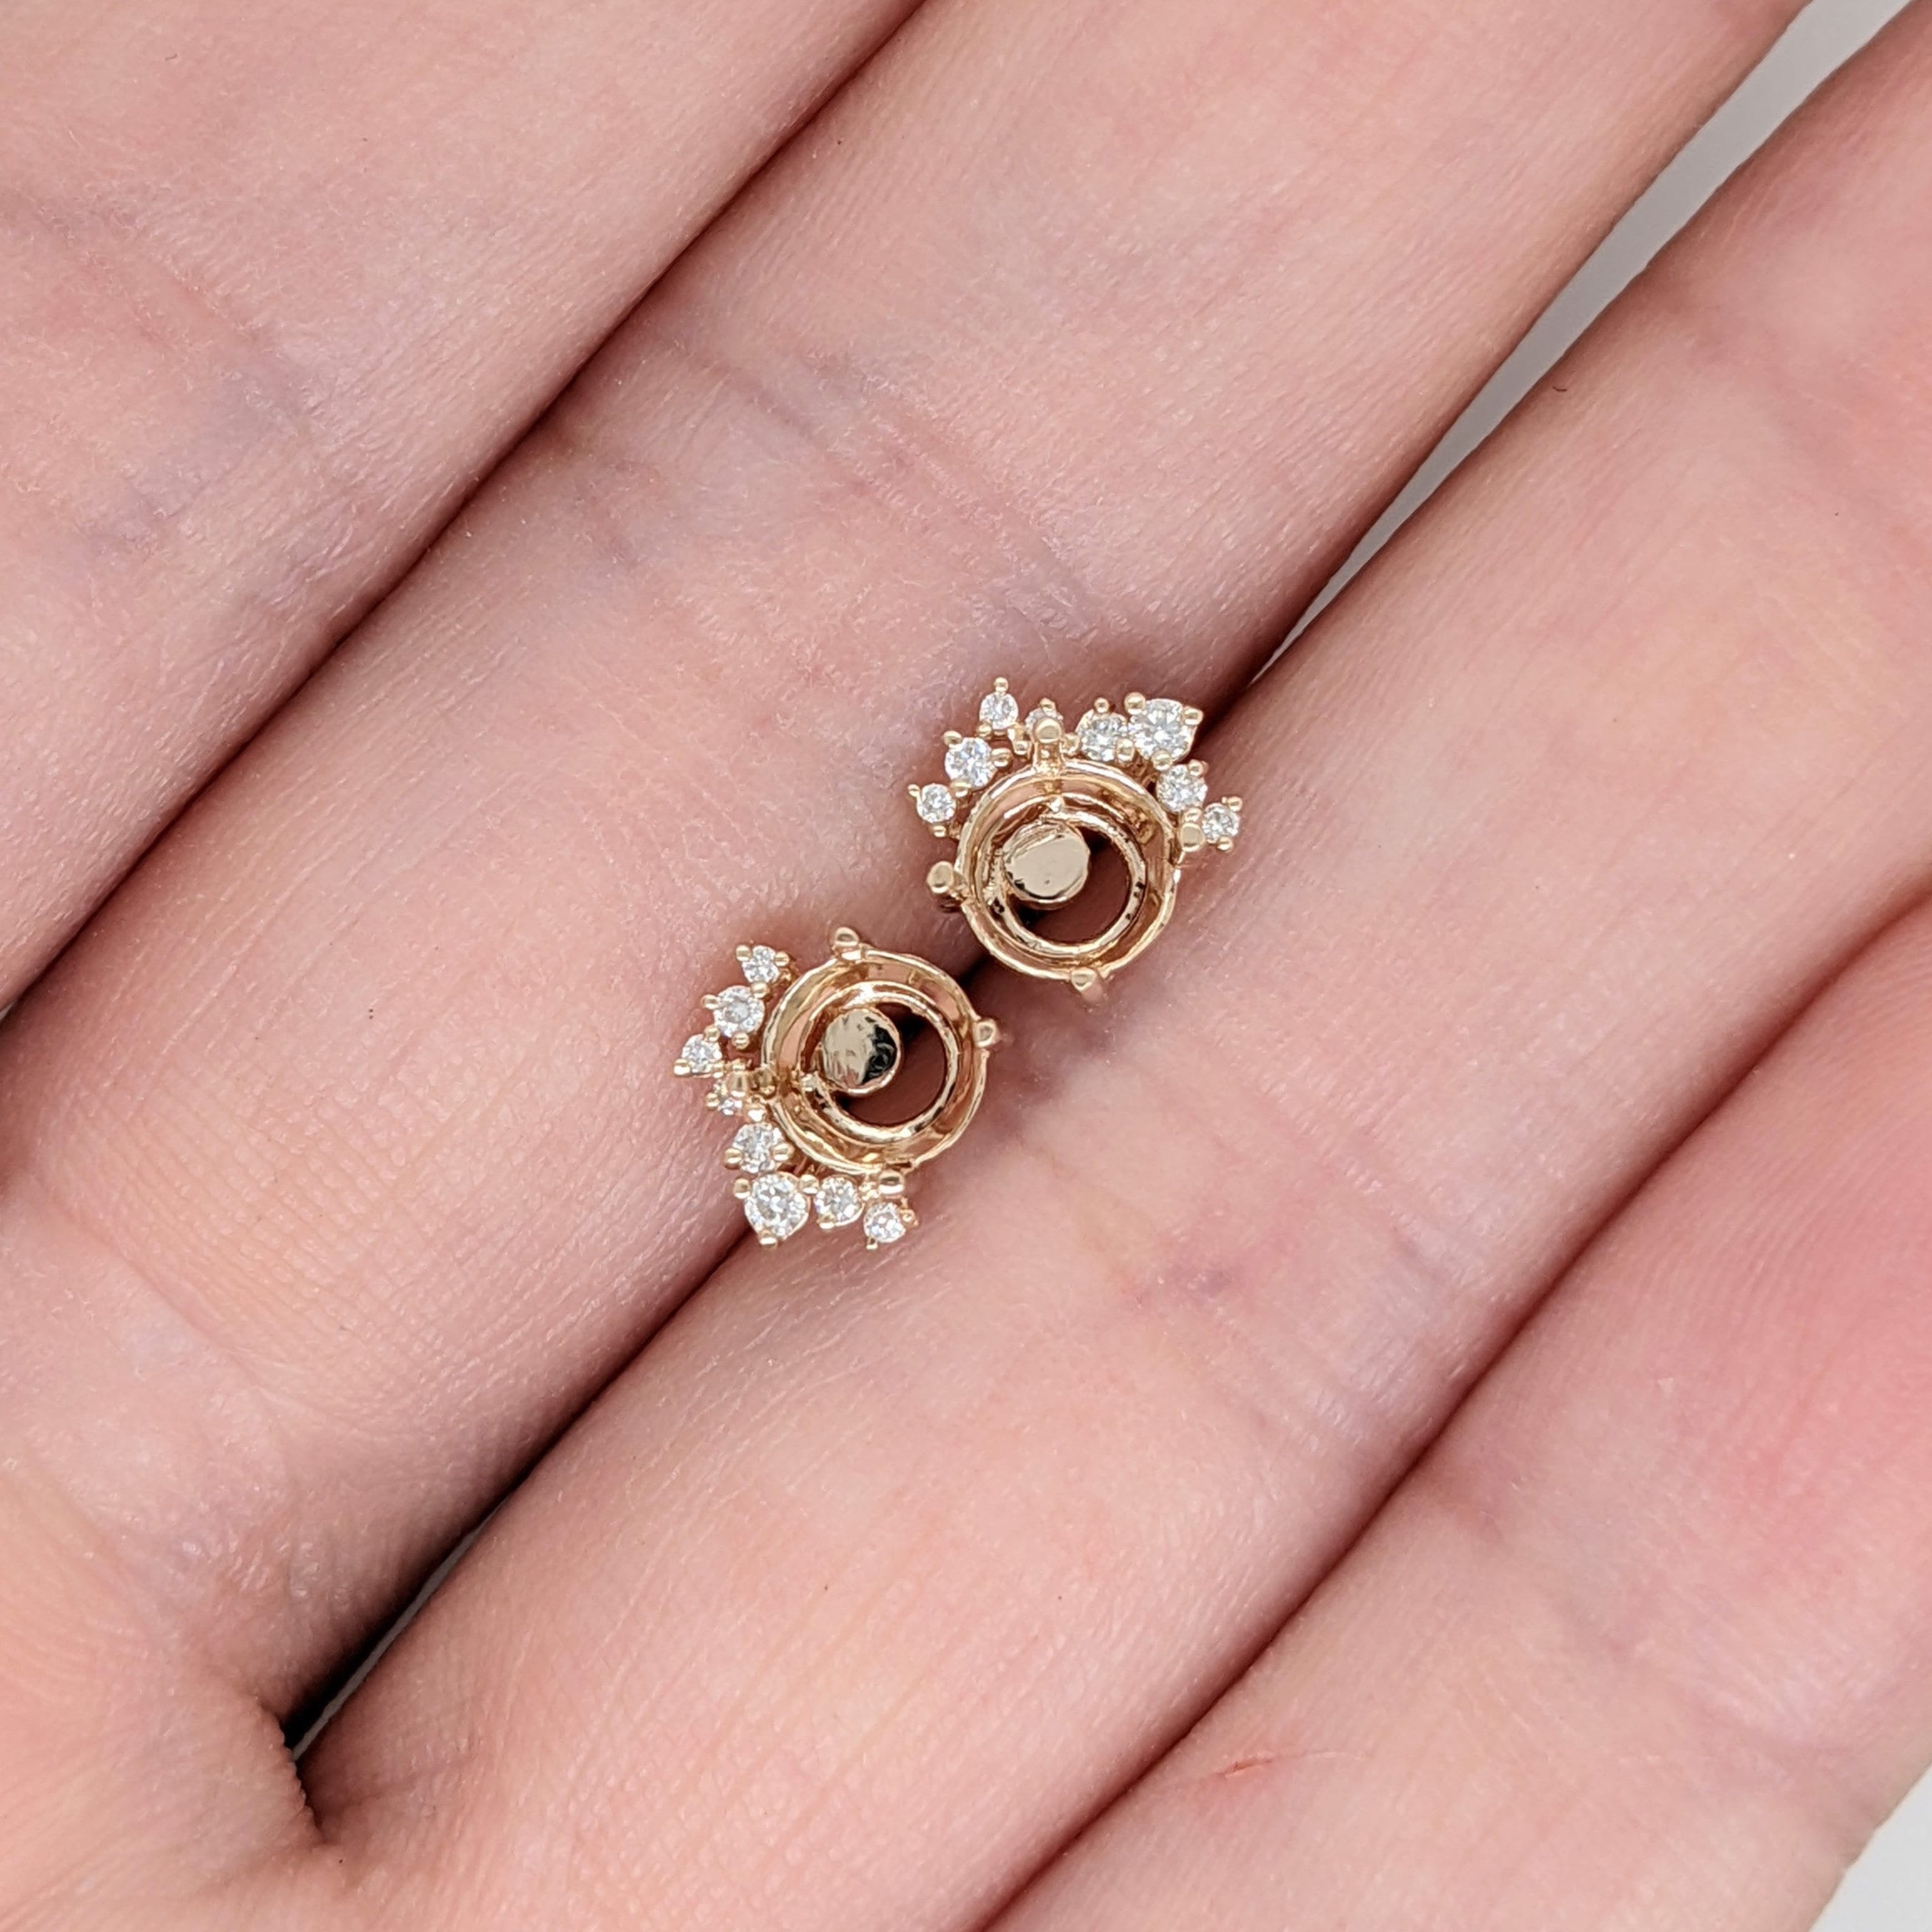 Asymmertrical Design Stud Earring Semi-Mount in 14k Solid Gold w Diamond Accents | Round 5mm | Secure Push Backs | Customizable